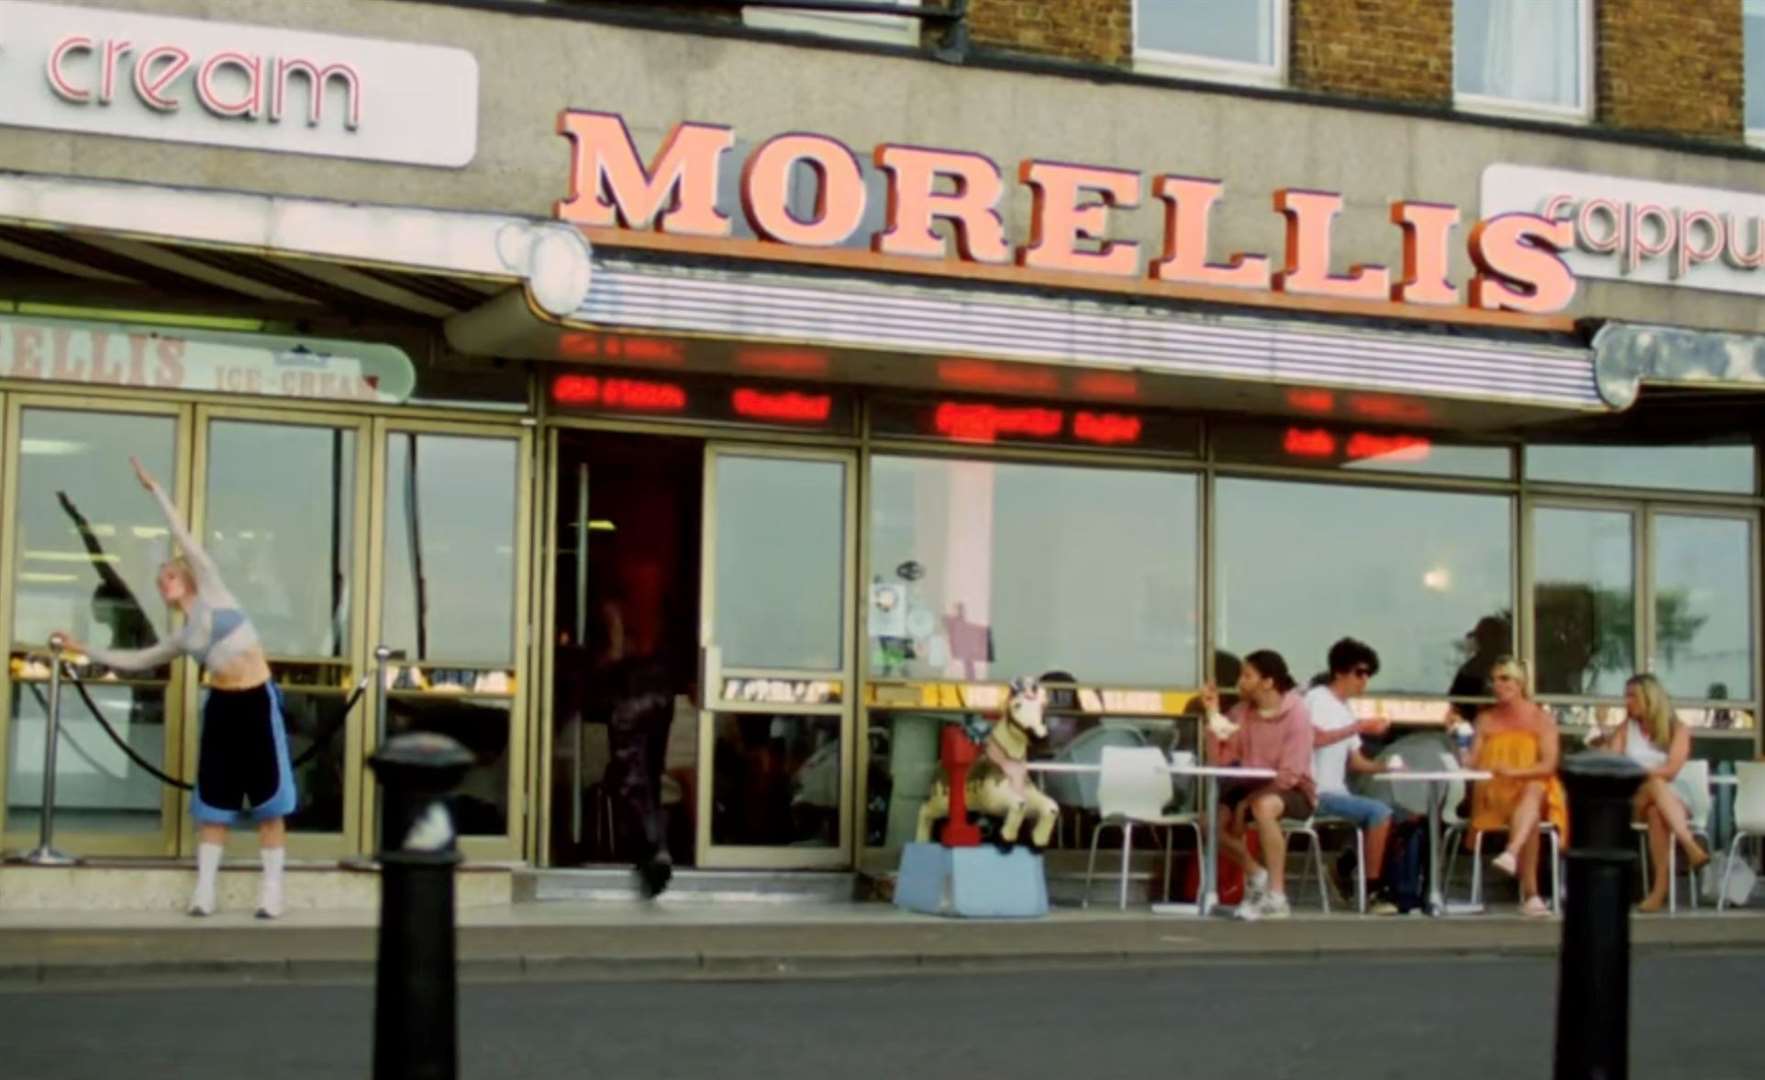 The famous Morelli's ice cream parlour in Viking Bay, Broadstairs gets a good showing in the new ad featuring Dua Lipa